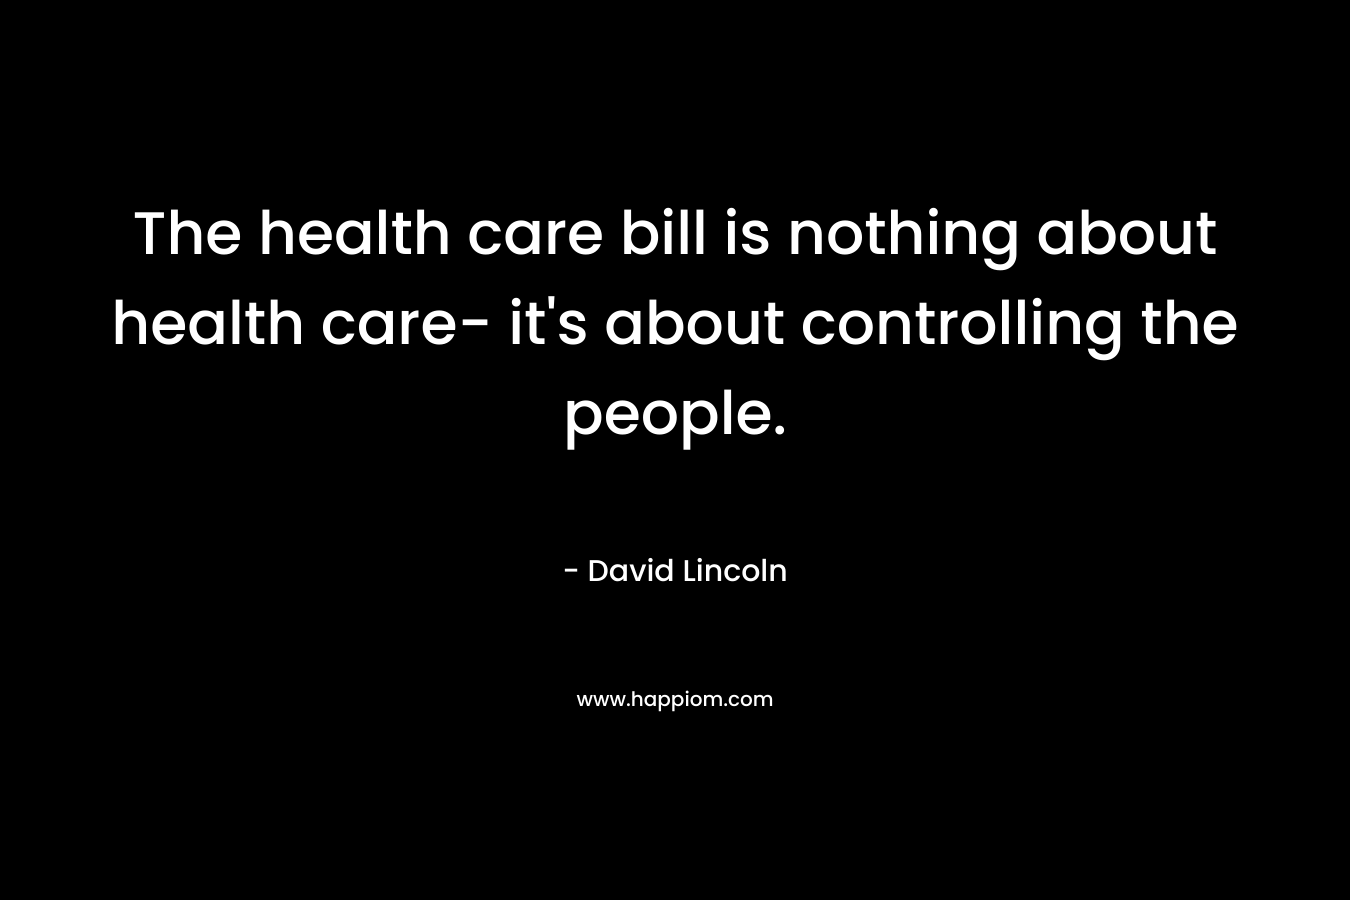 The health care bill is nothing about health care- it’s about controlling the people. – David Lincoln